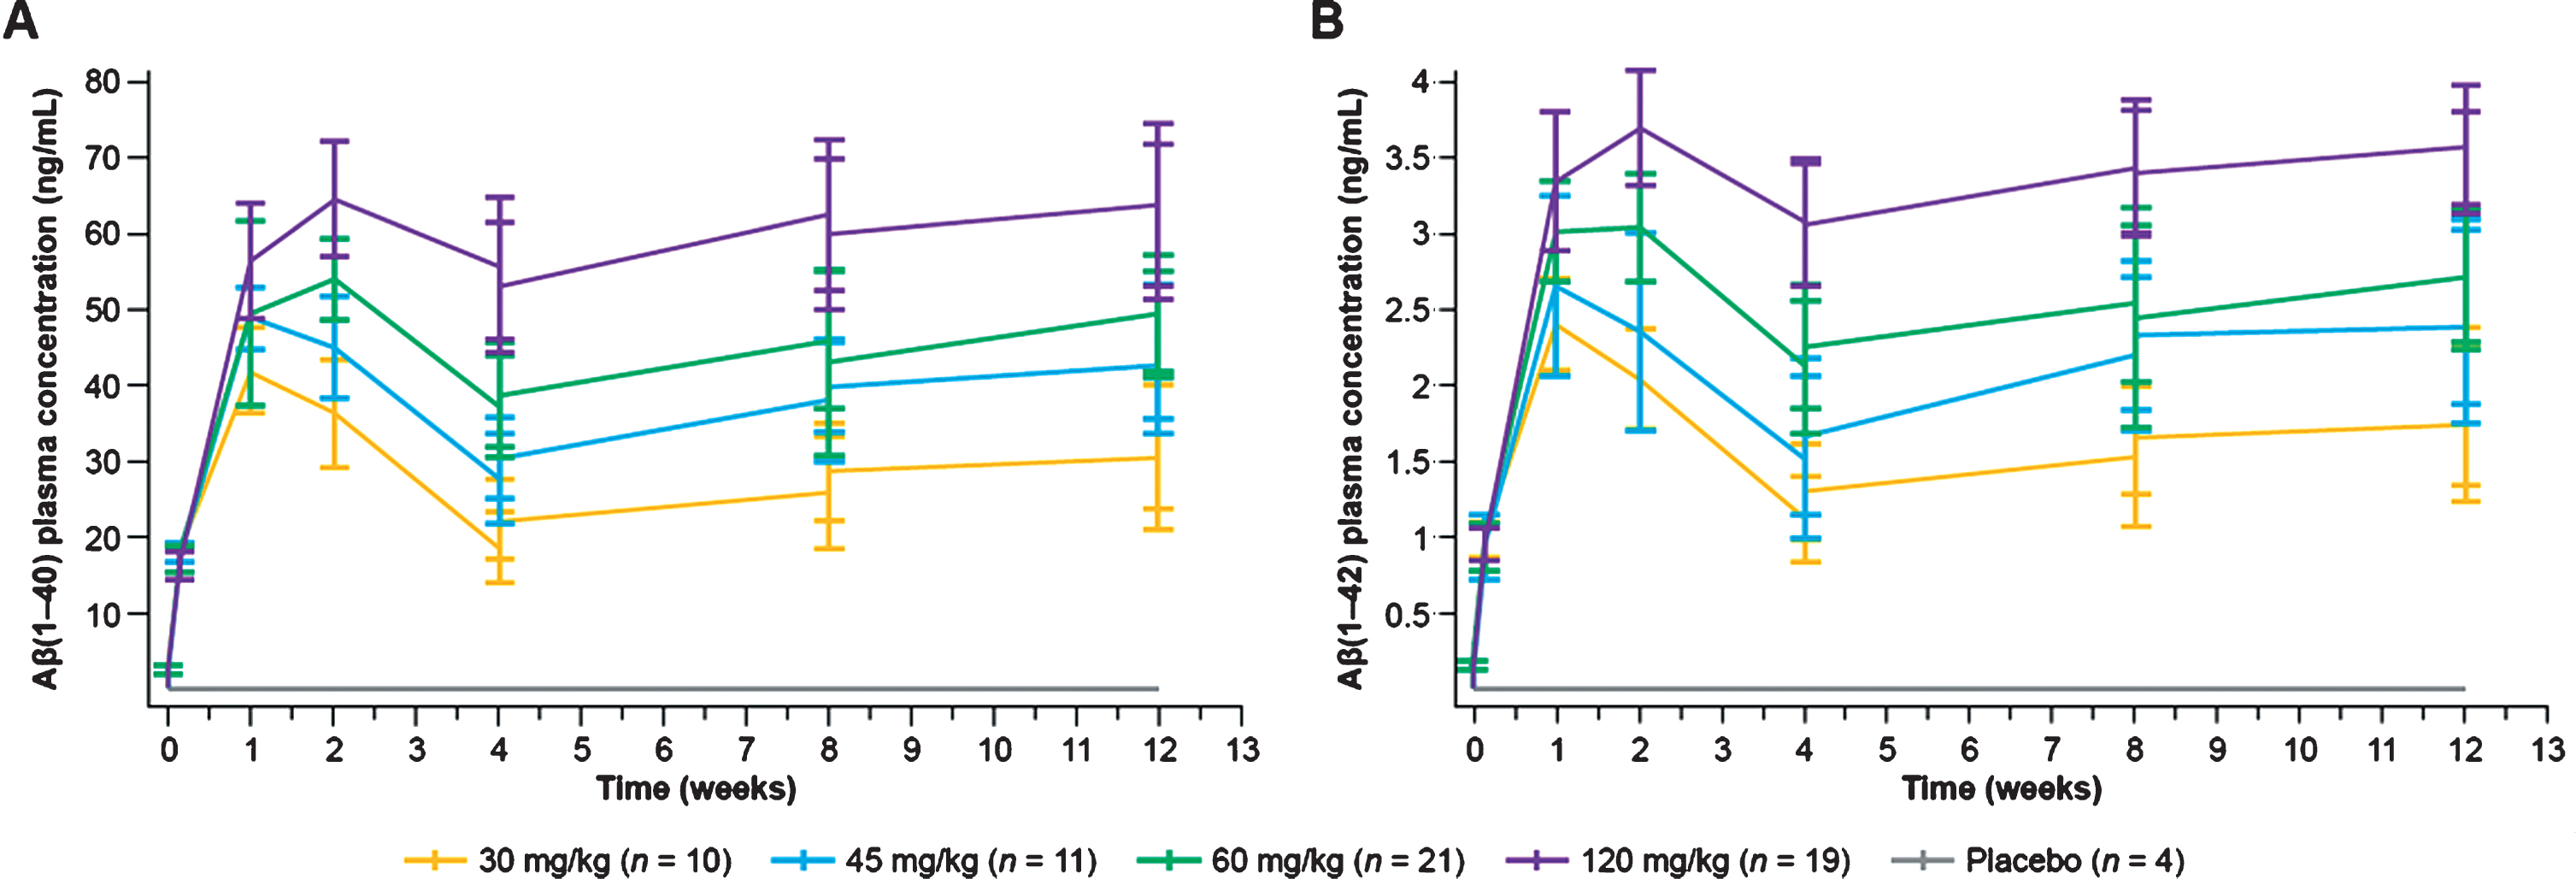 Plasma Aβ1–40(A) and Aβ1–42 (B) concentrations following administration of crenezumab during the 13-week, double-blind, randomized treatment phase. Aβ, amyloid-β.